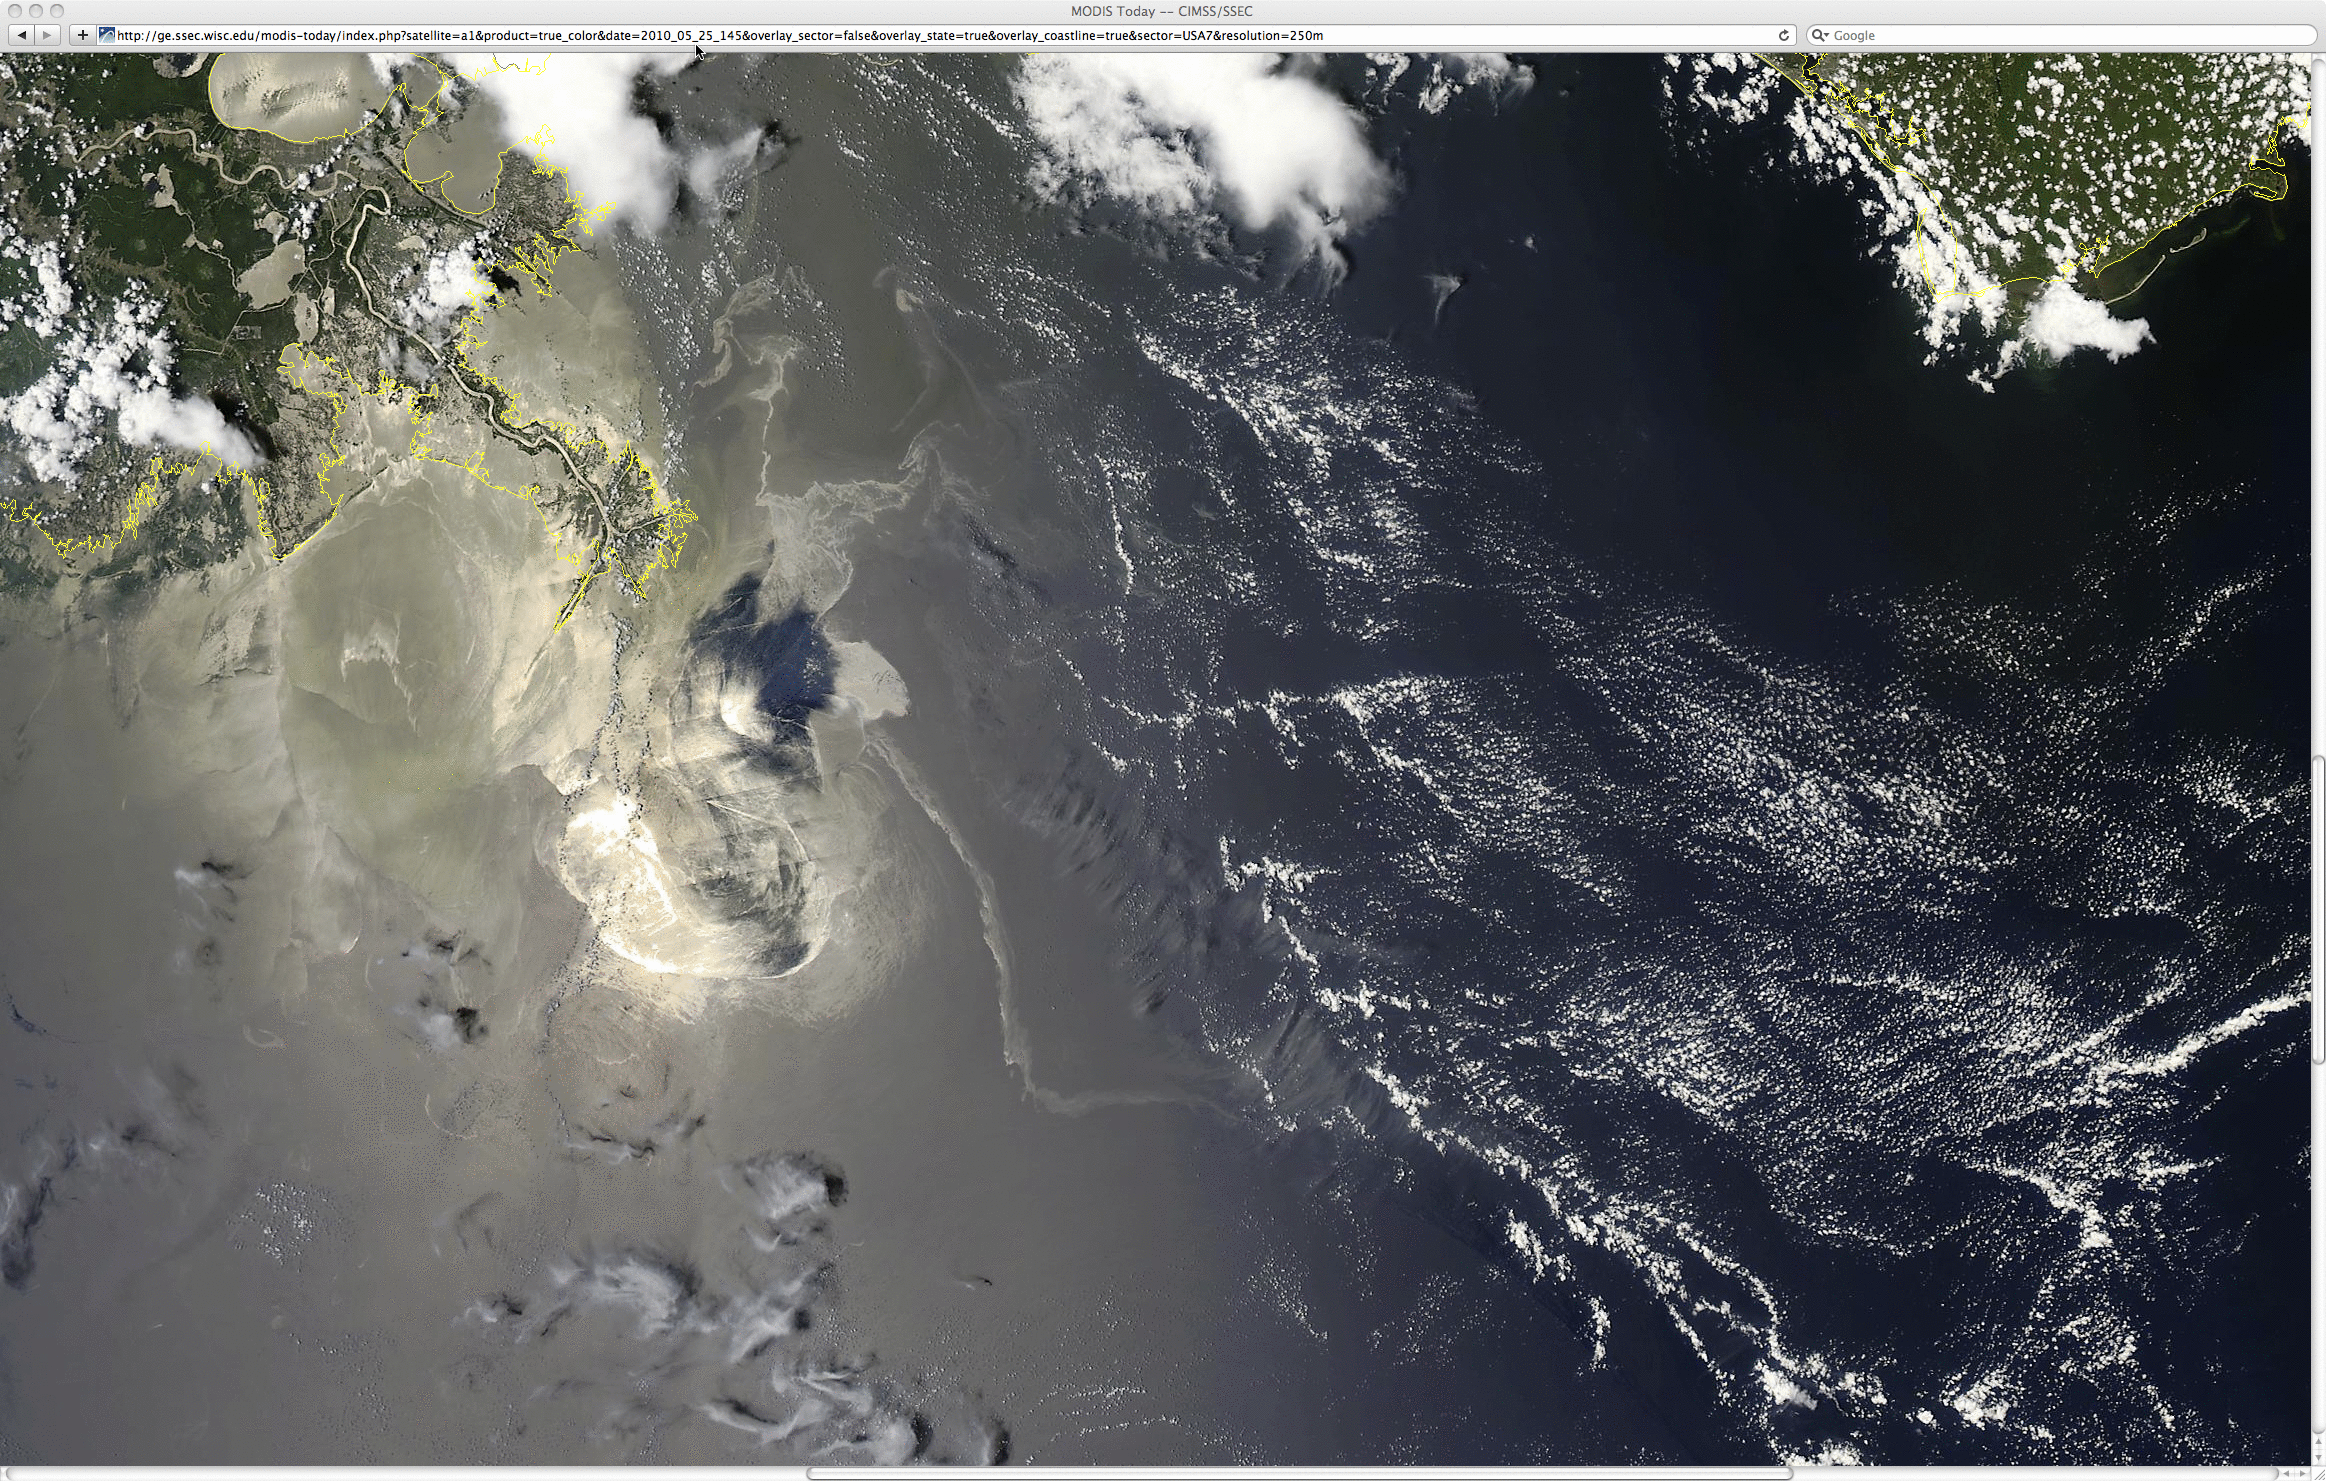 MODIS true color (using Bands 1/4/3) and false color (using bands 7/2/1) images